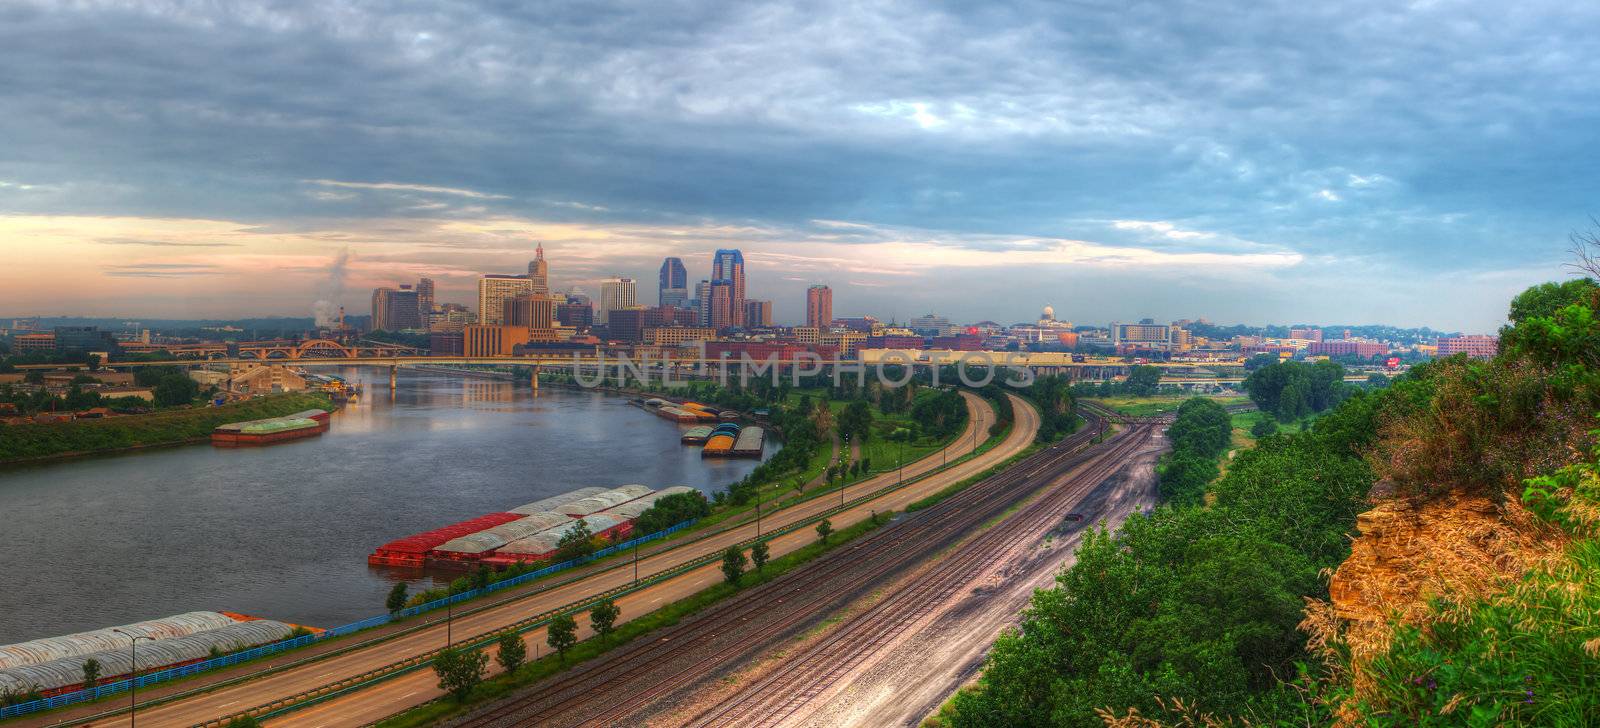 Cityscape panorama of St. Paul Minnesota in hdr.